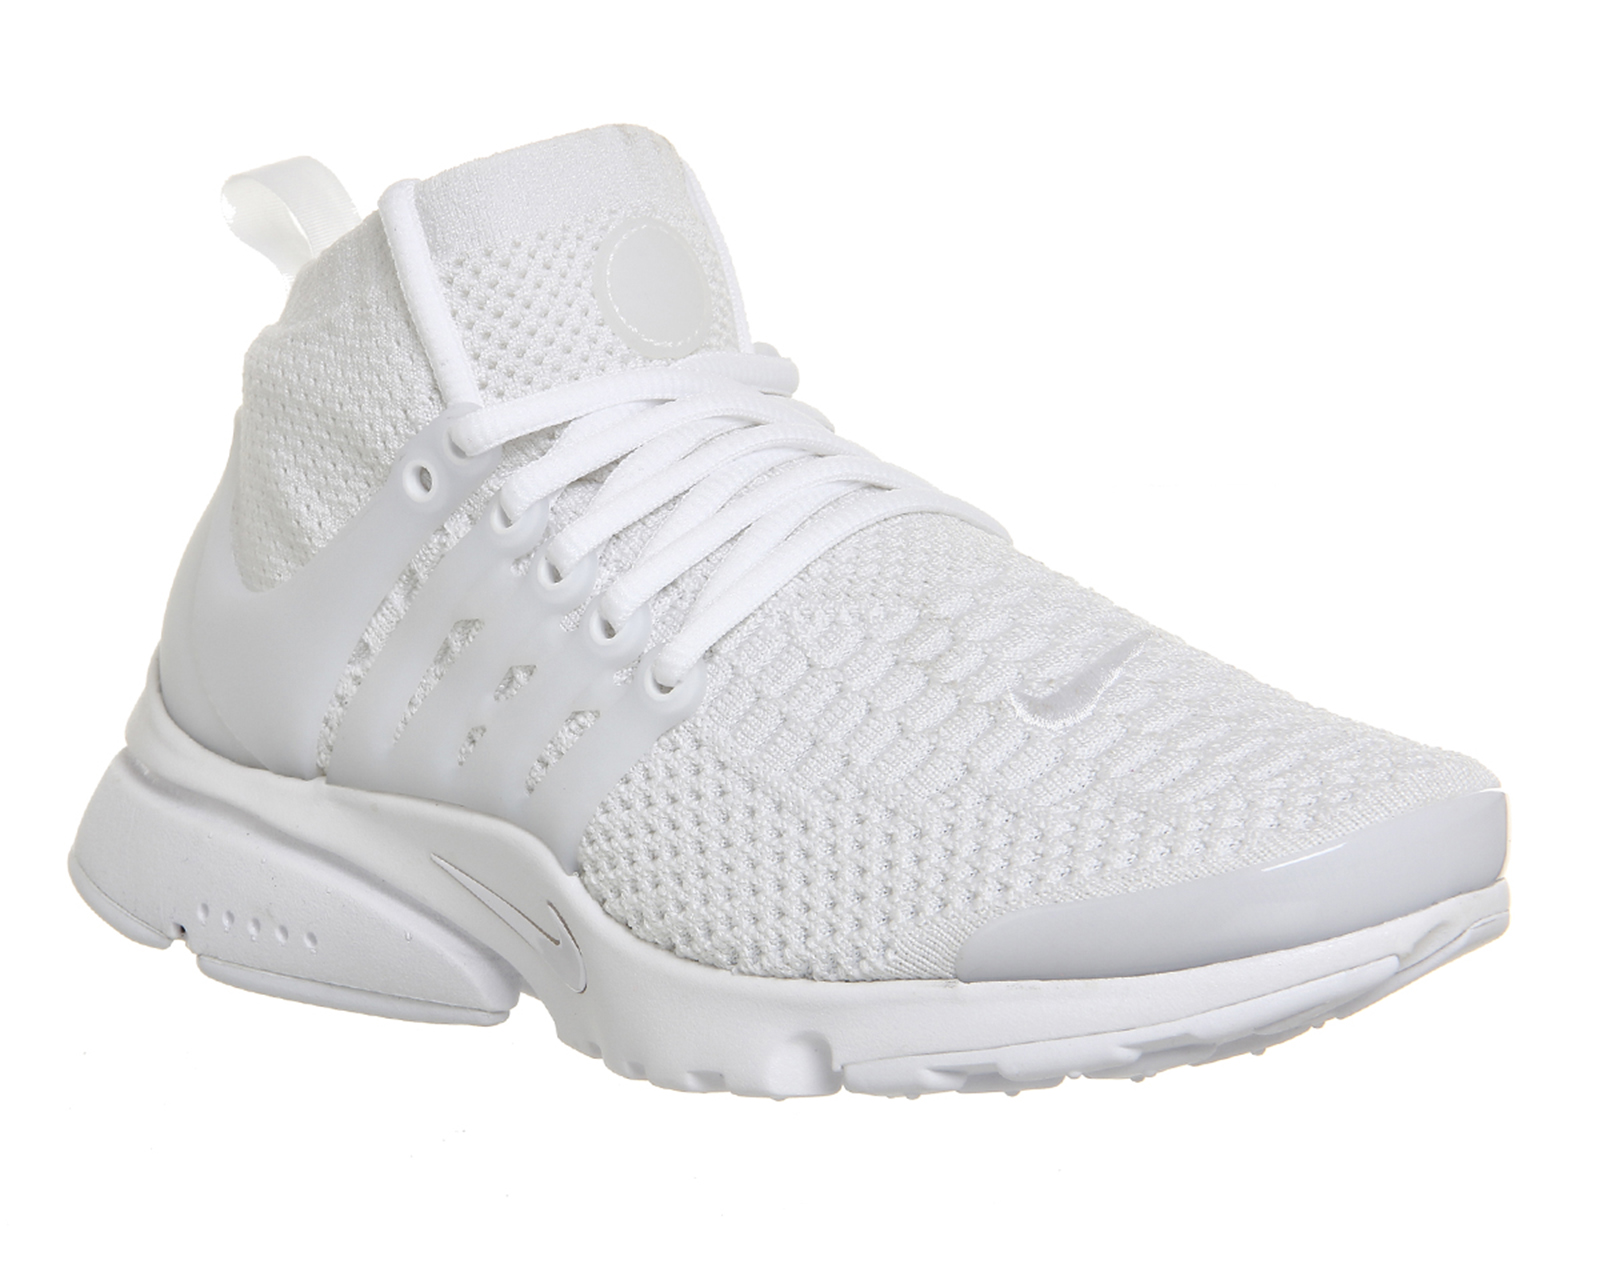 nike air presto flyknit white buy clothes shoes online